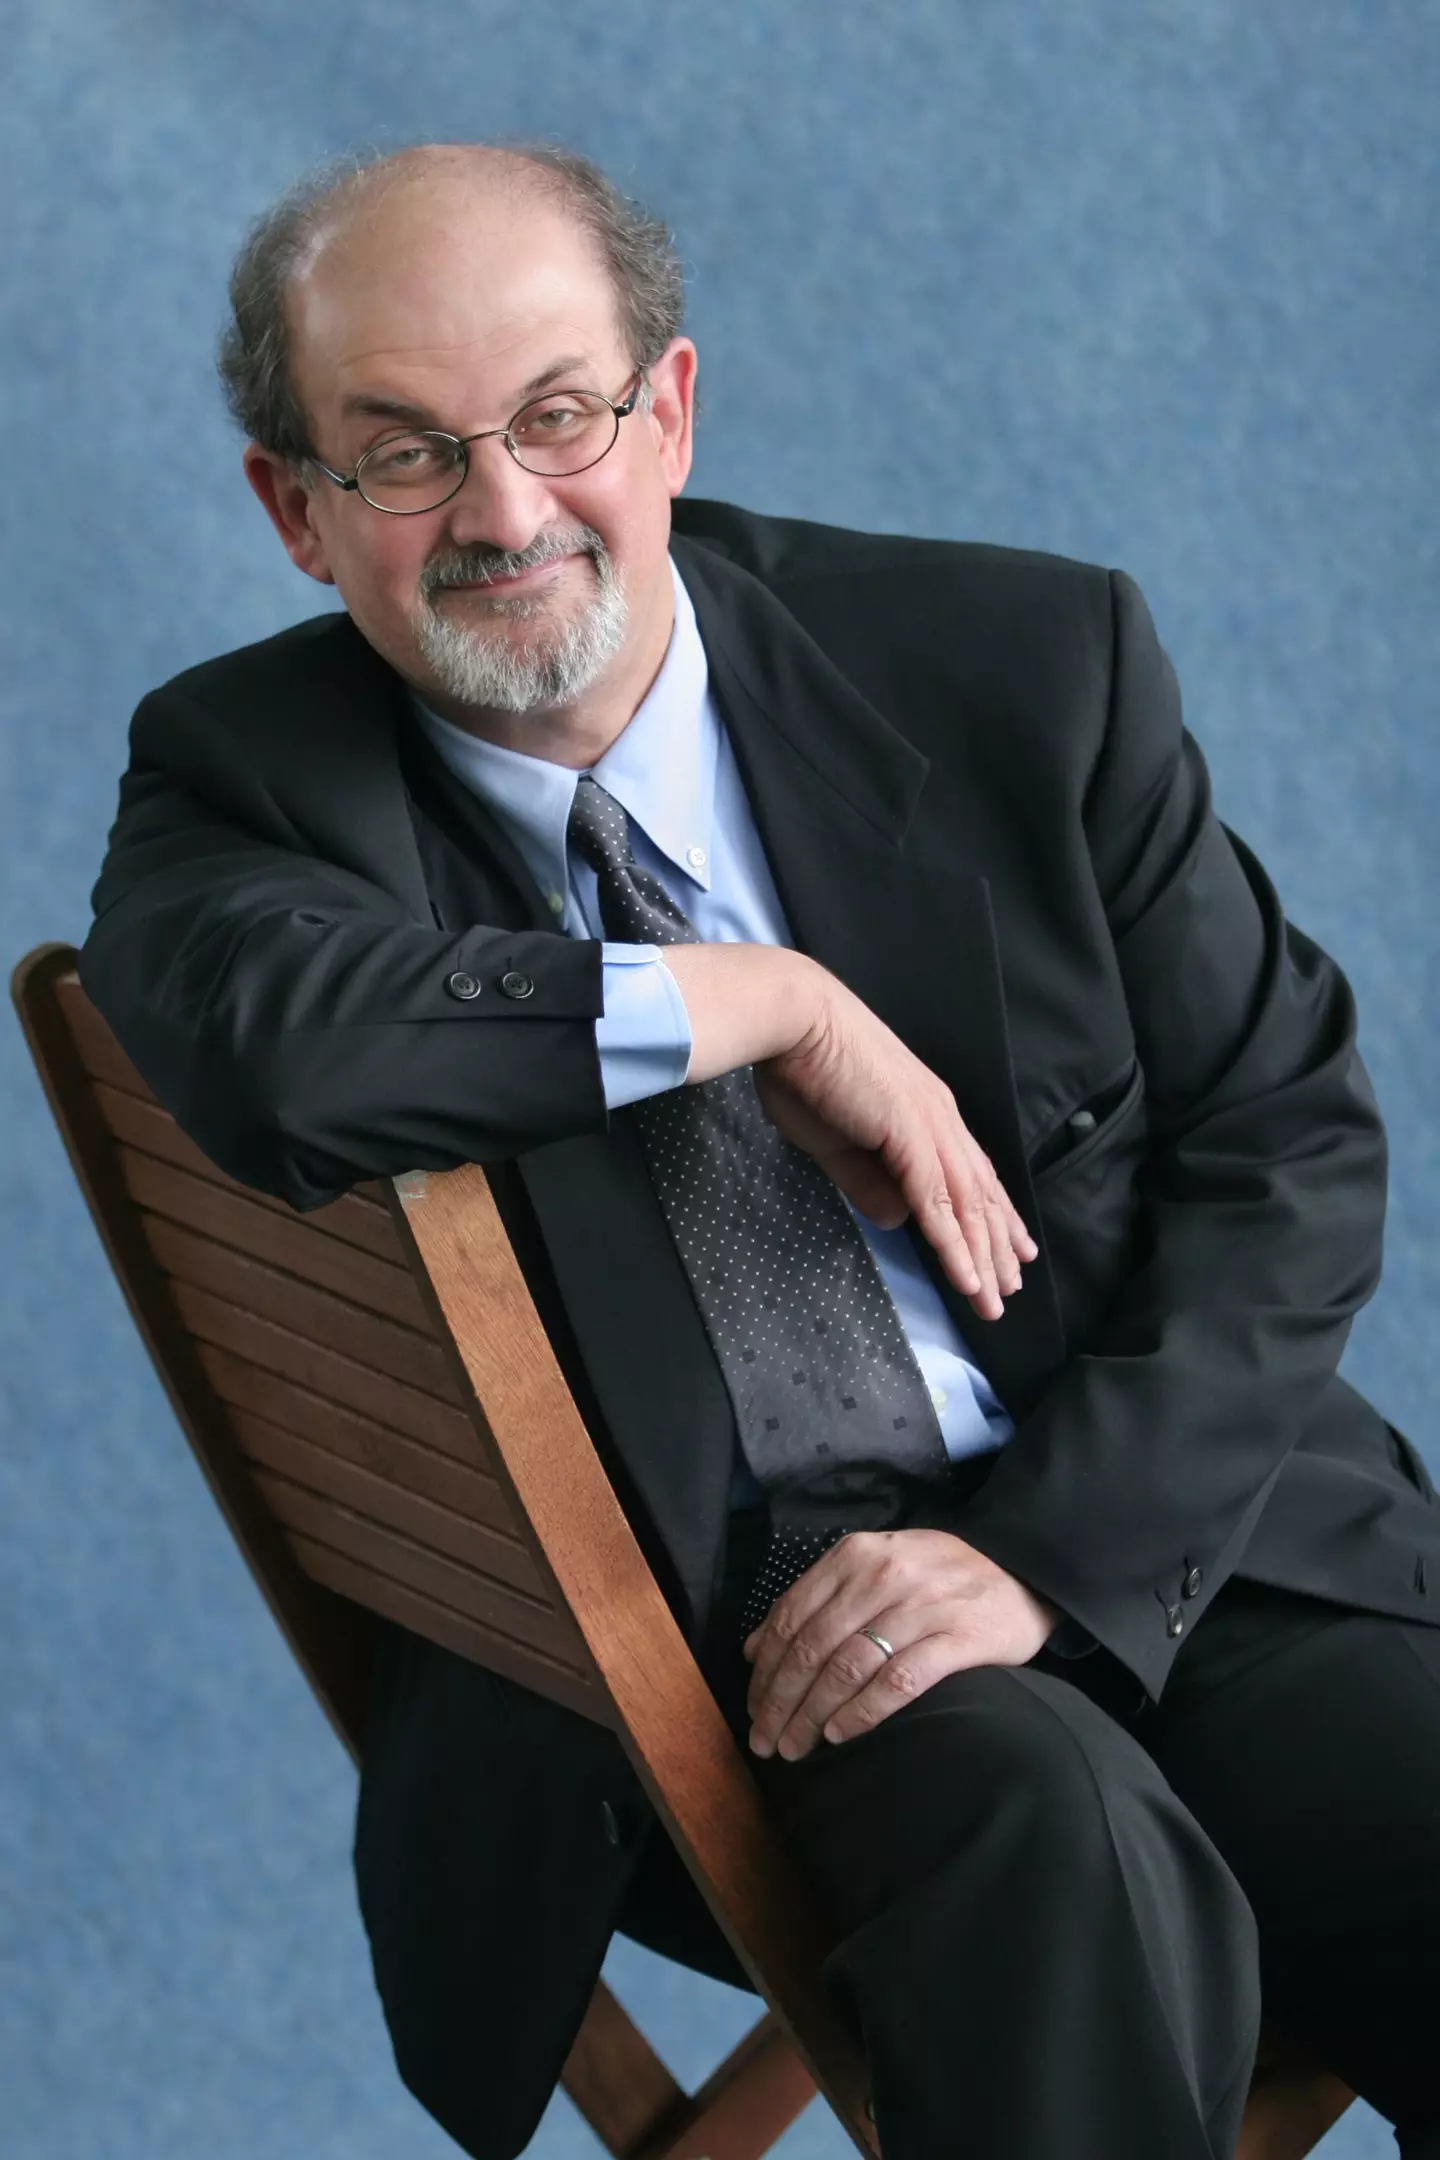 Salman Rushdie was attacked at an event in New York.